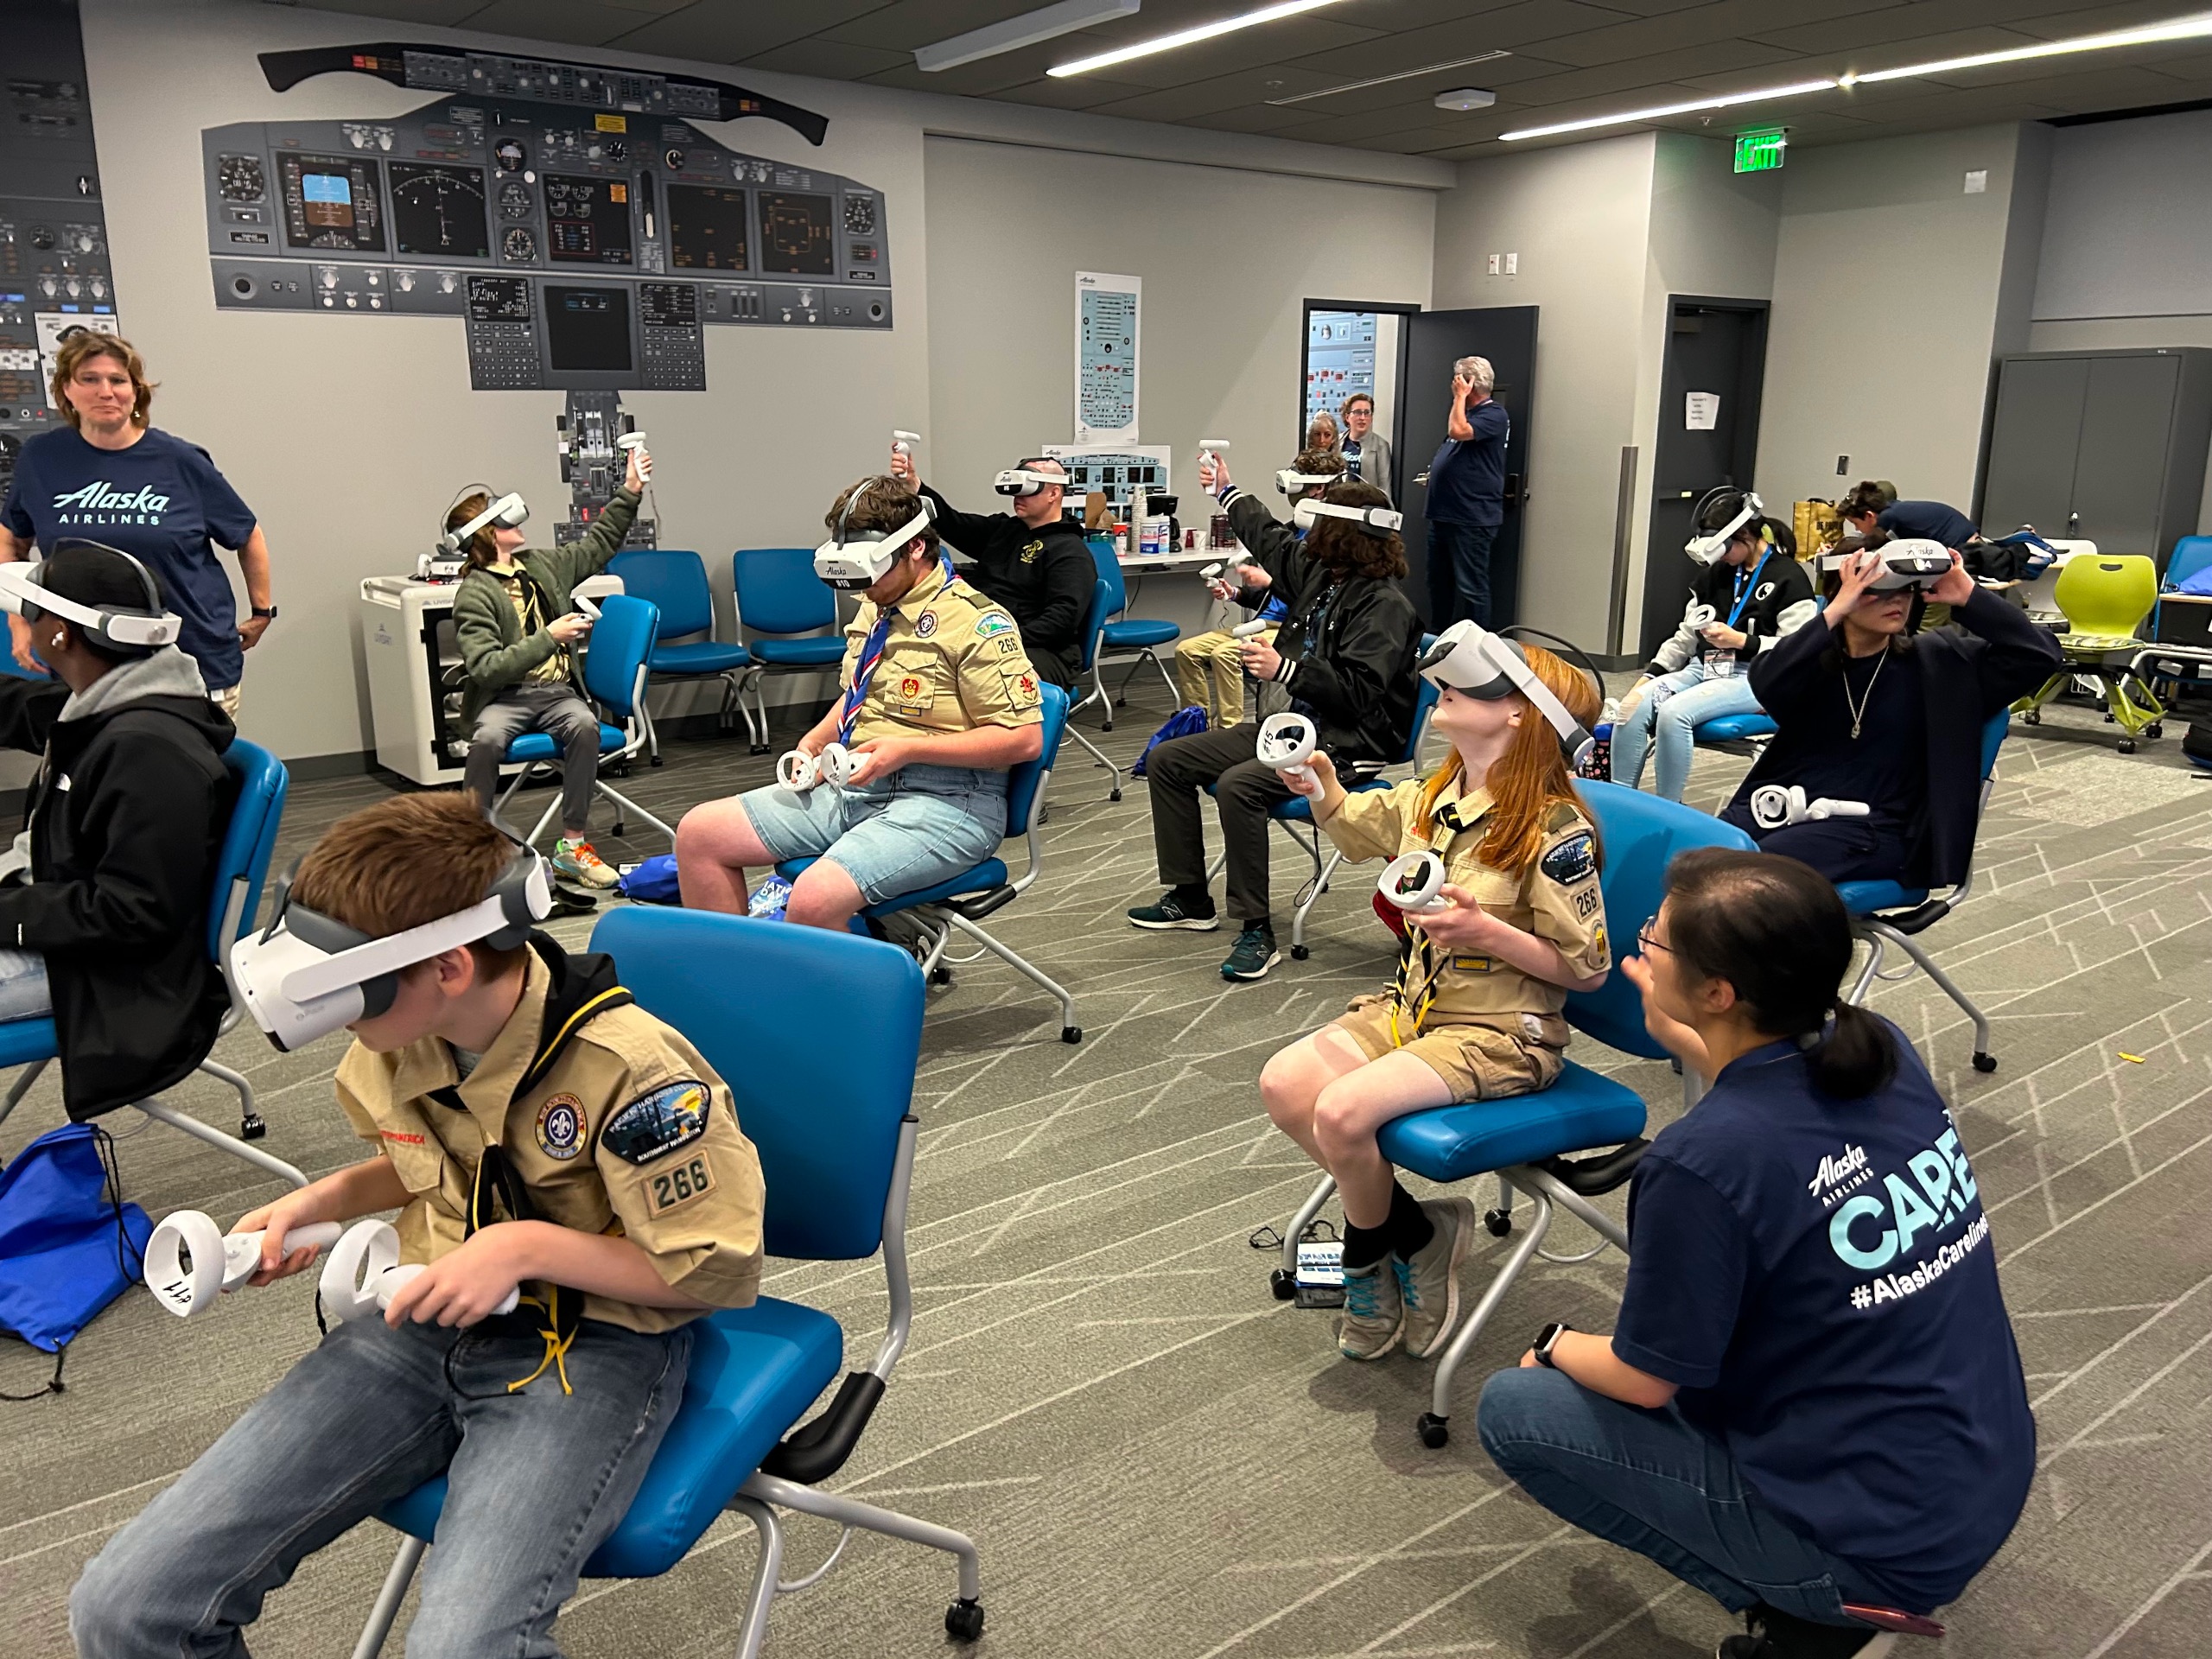 Scouts sitting in chairs using VR headsets.